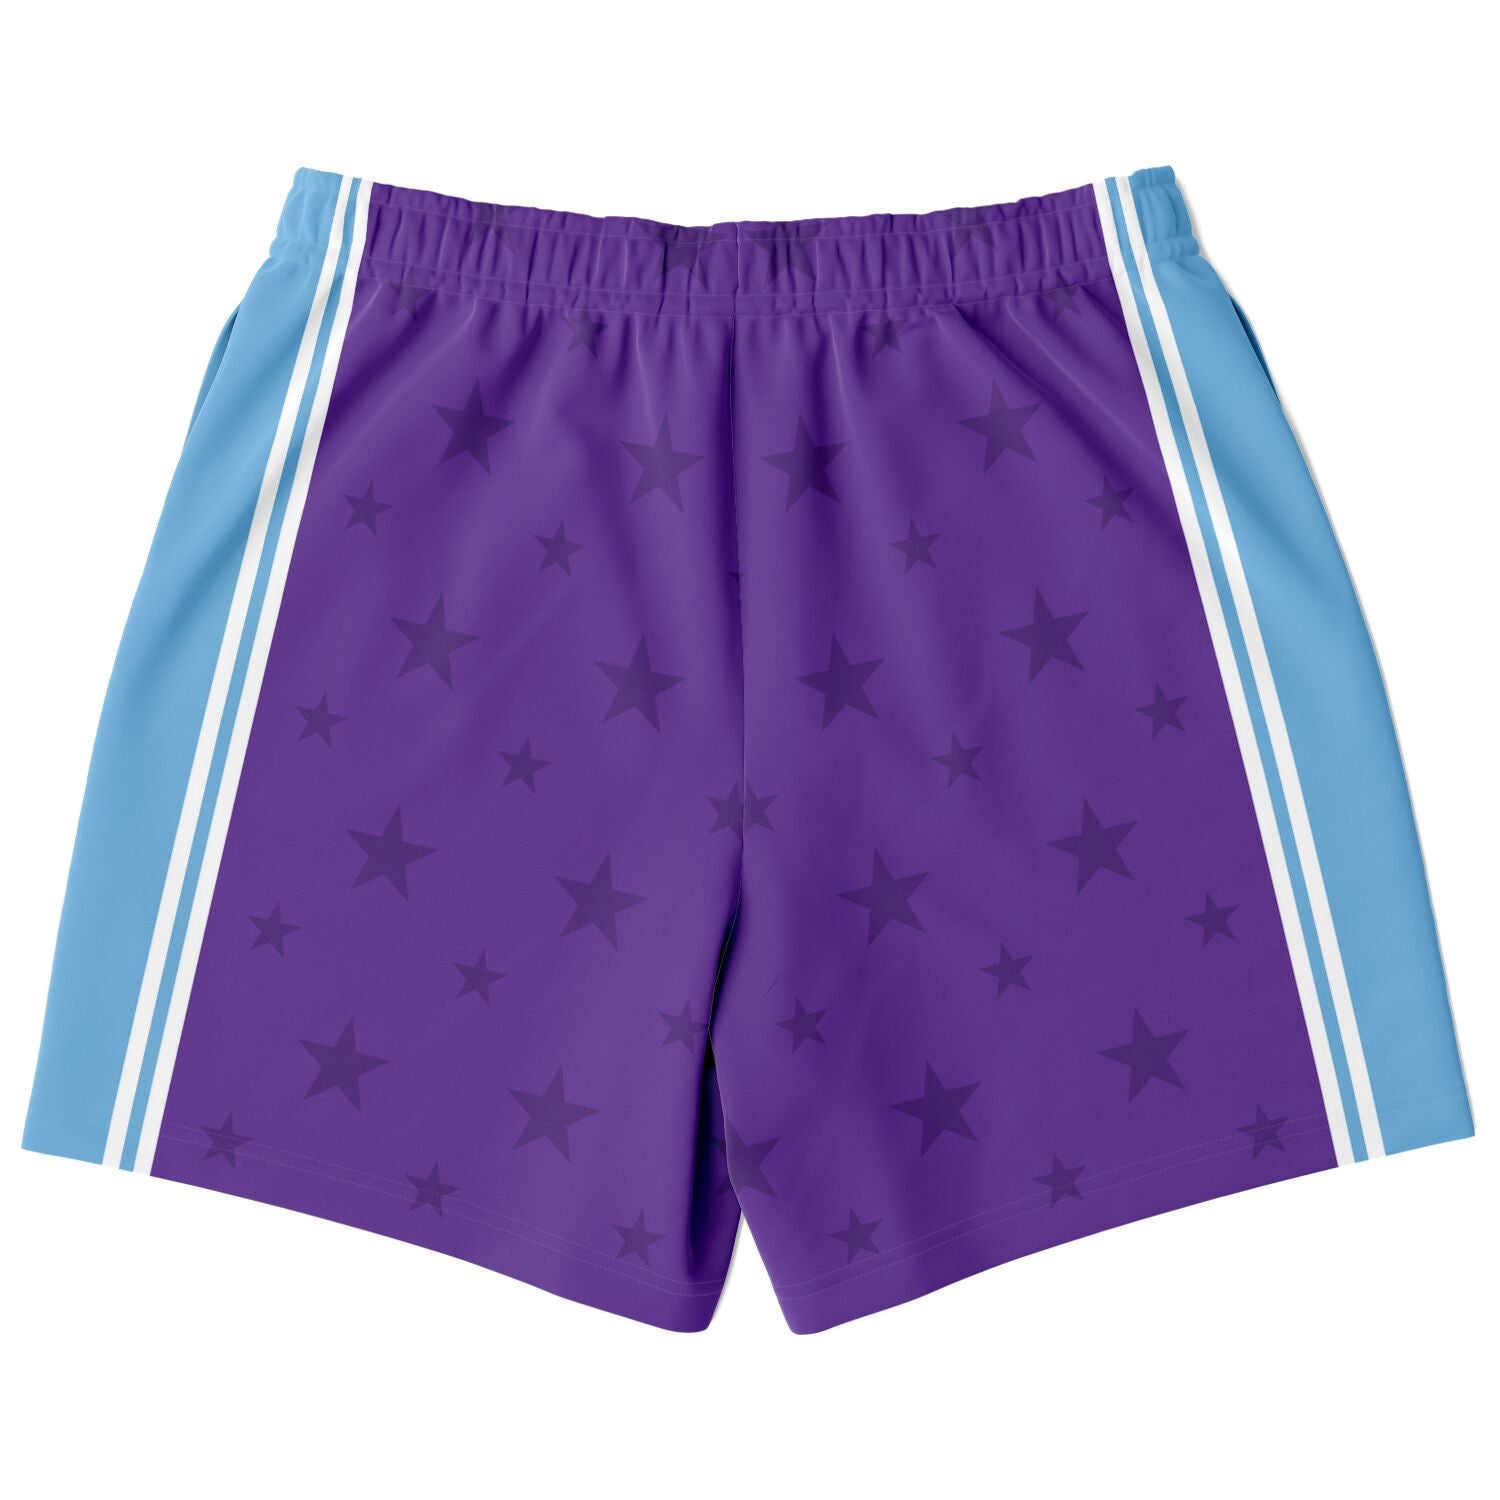 Short-Lebron-James-Los-Angeles-Lakers-Dearbball-vetements-marque-france